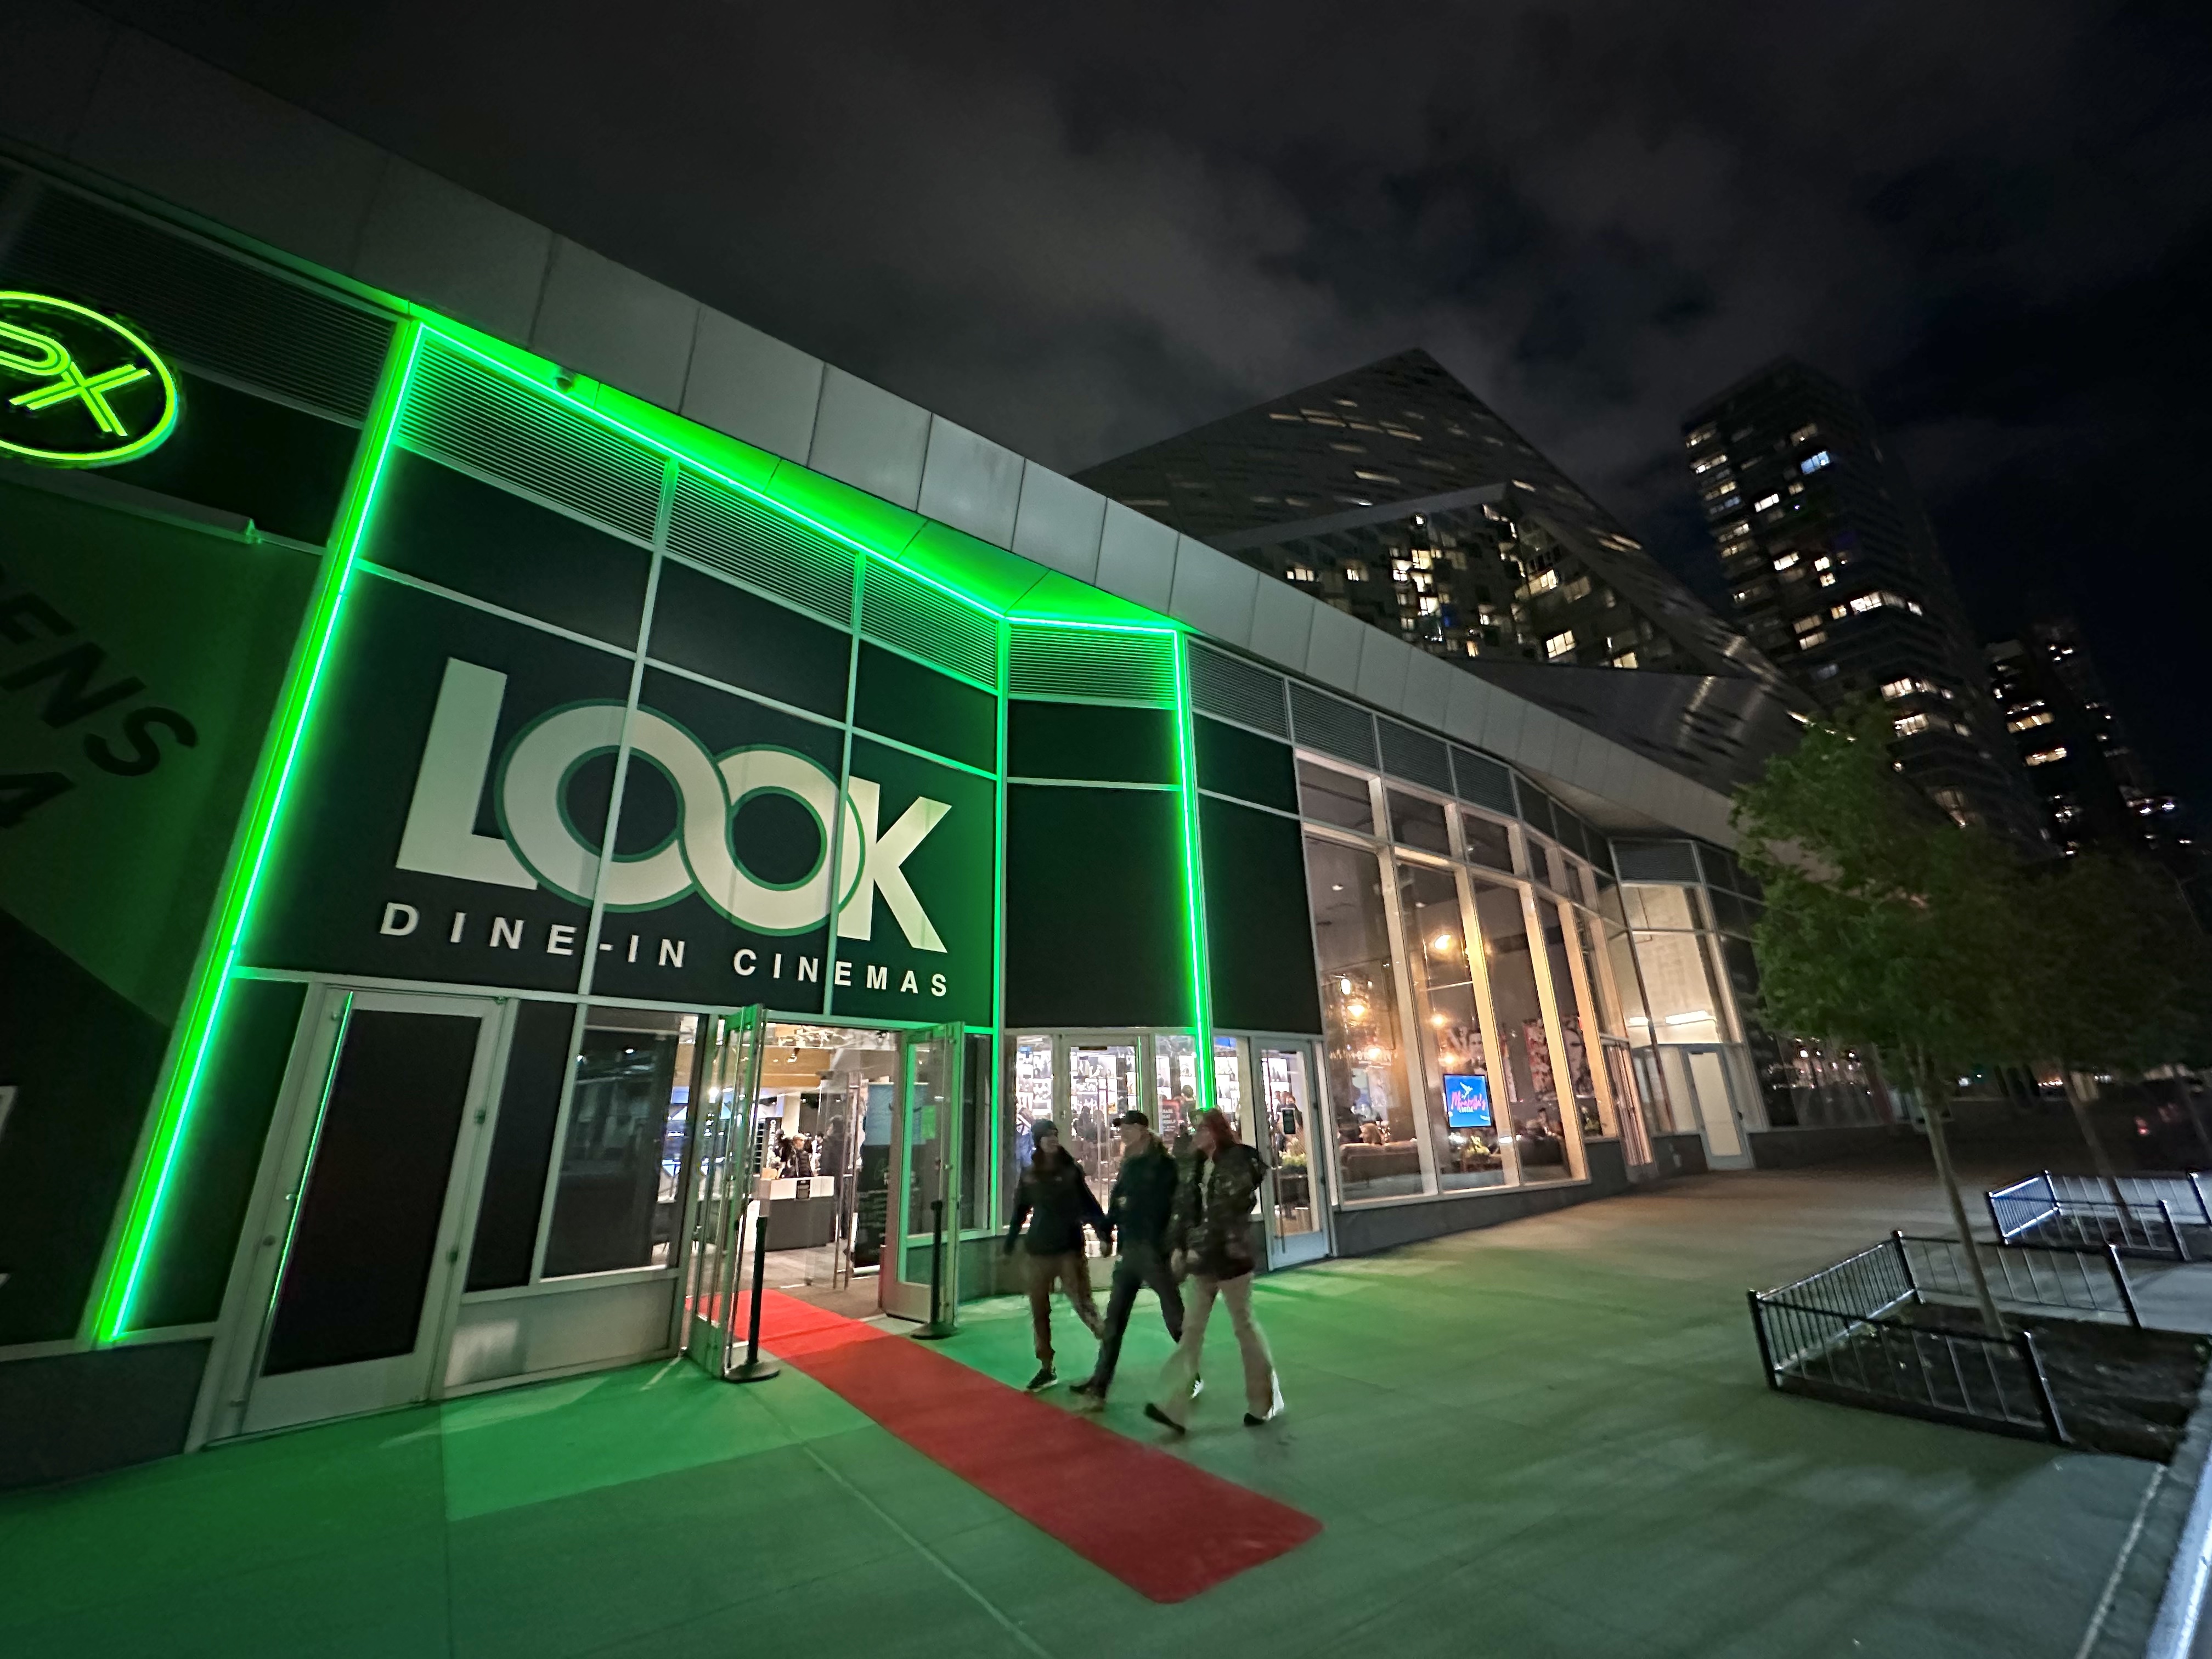 The red carpet is out at LOOK Dine-In Cinemas on W57th Street. 